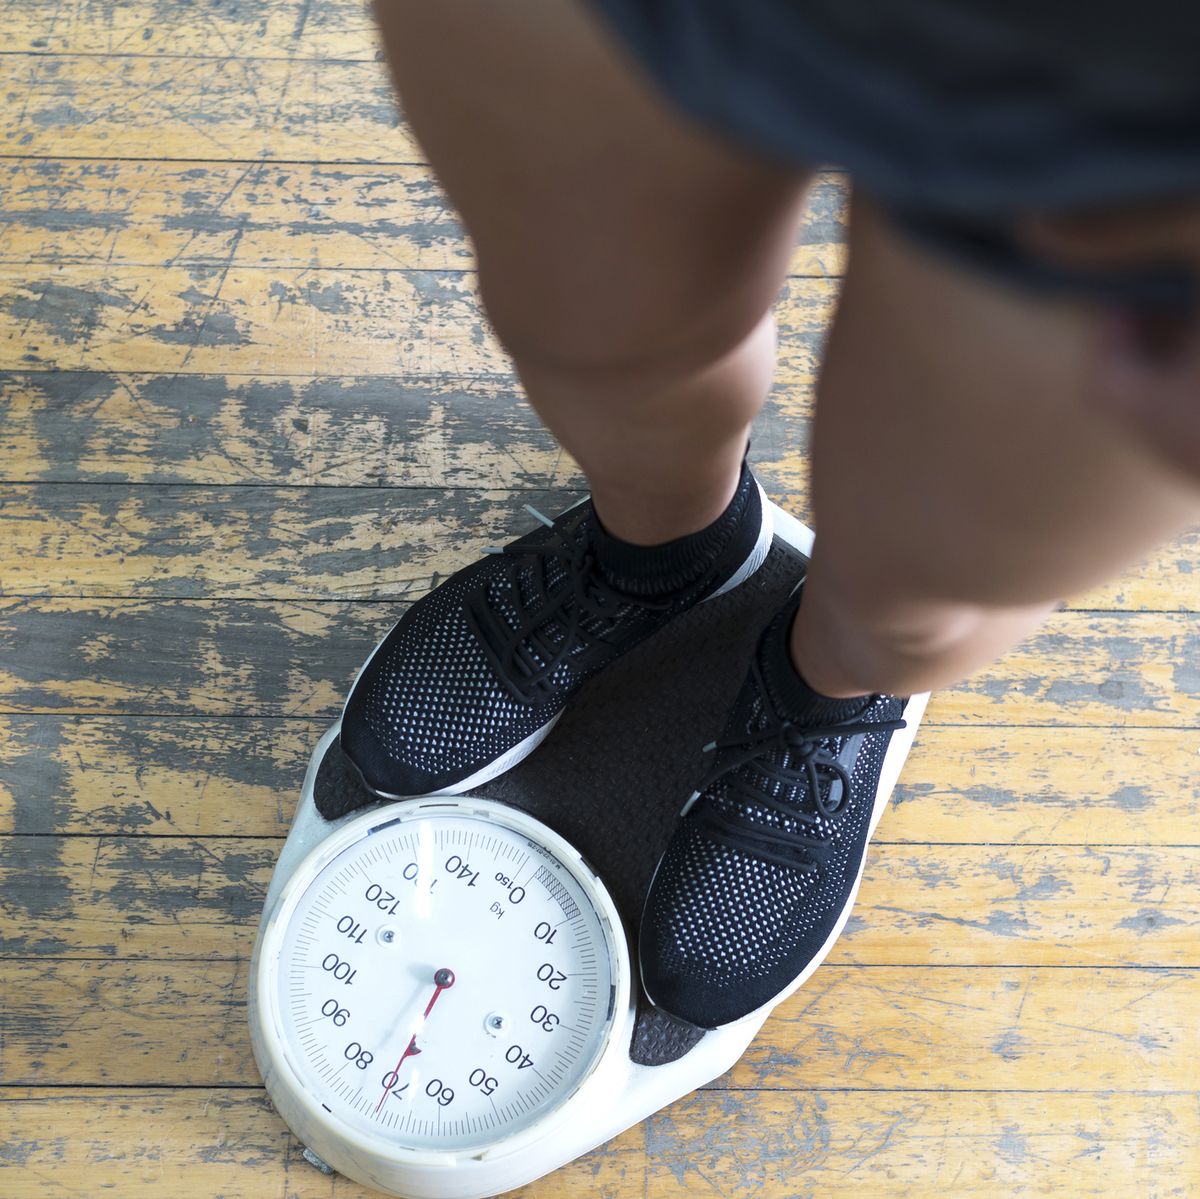 How Much Should You Run To Lose Weight? Experts Weigh In